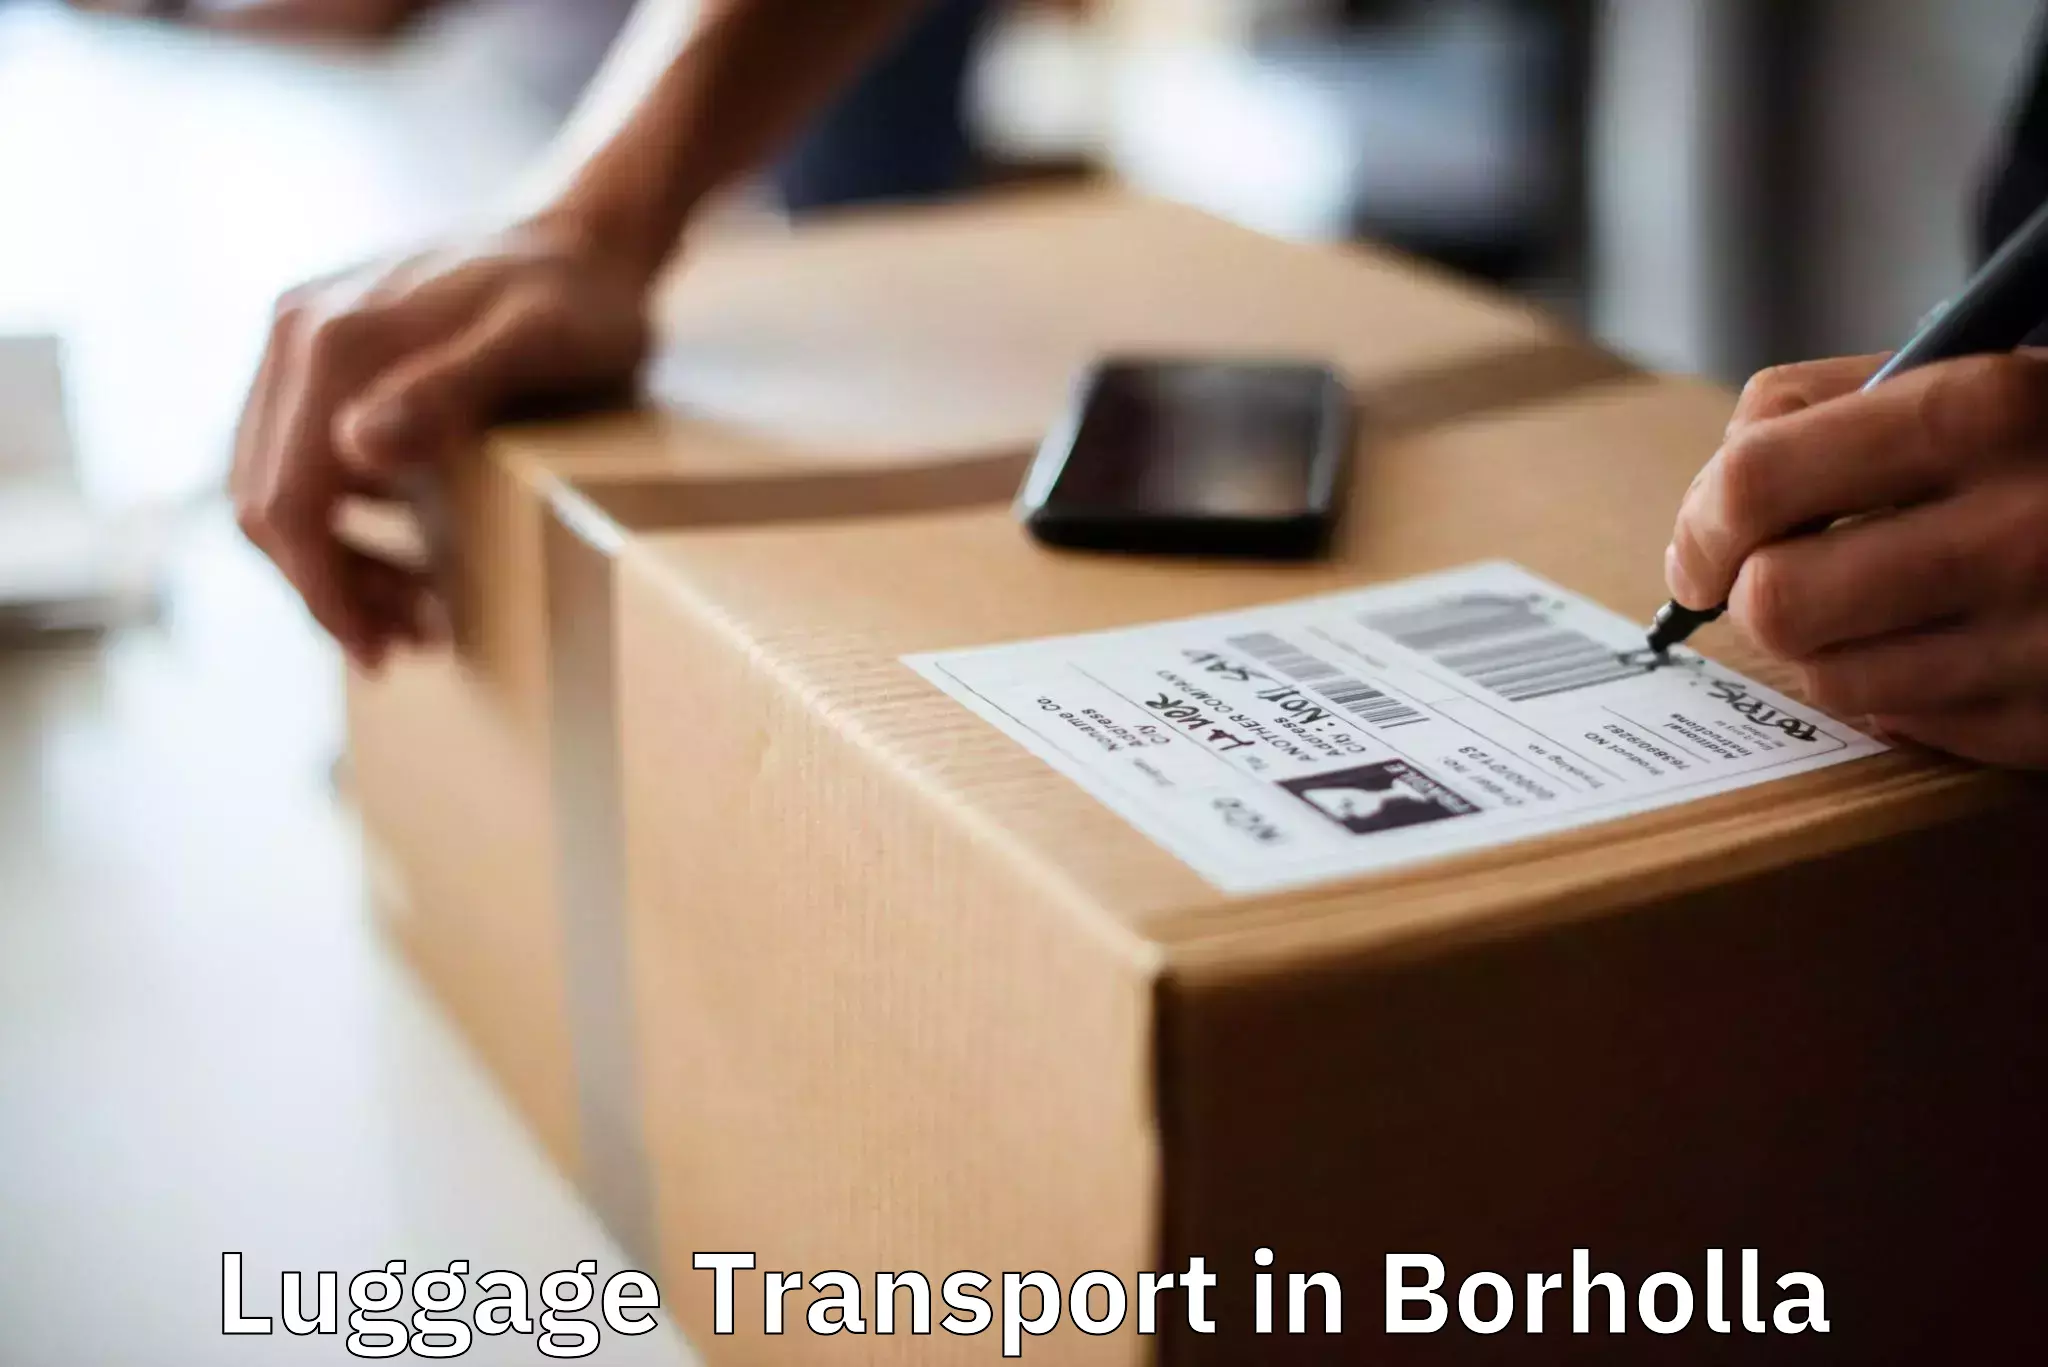 Luggage delivery rates in Borholla